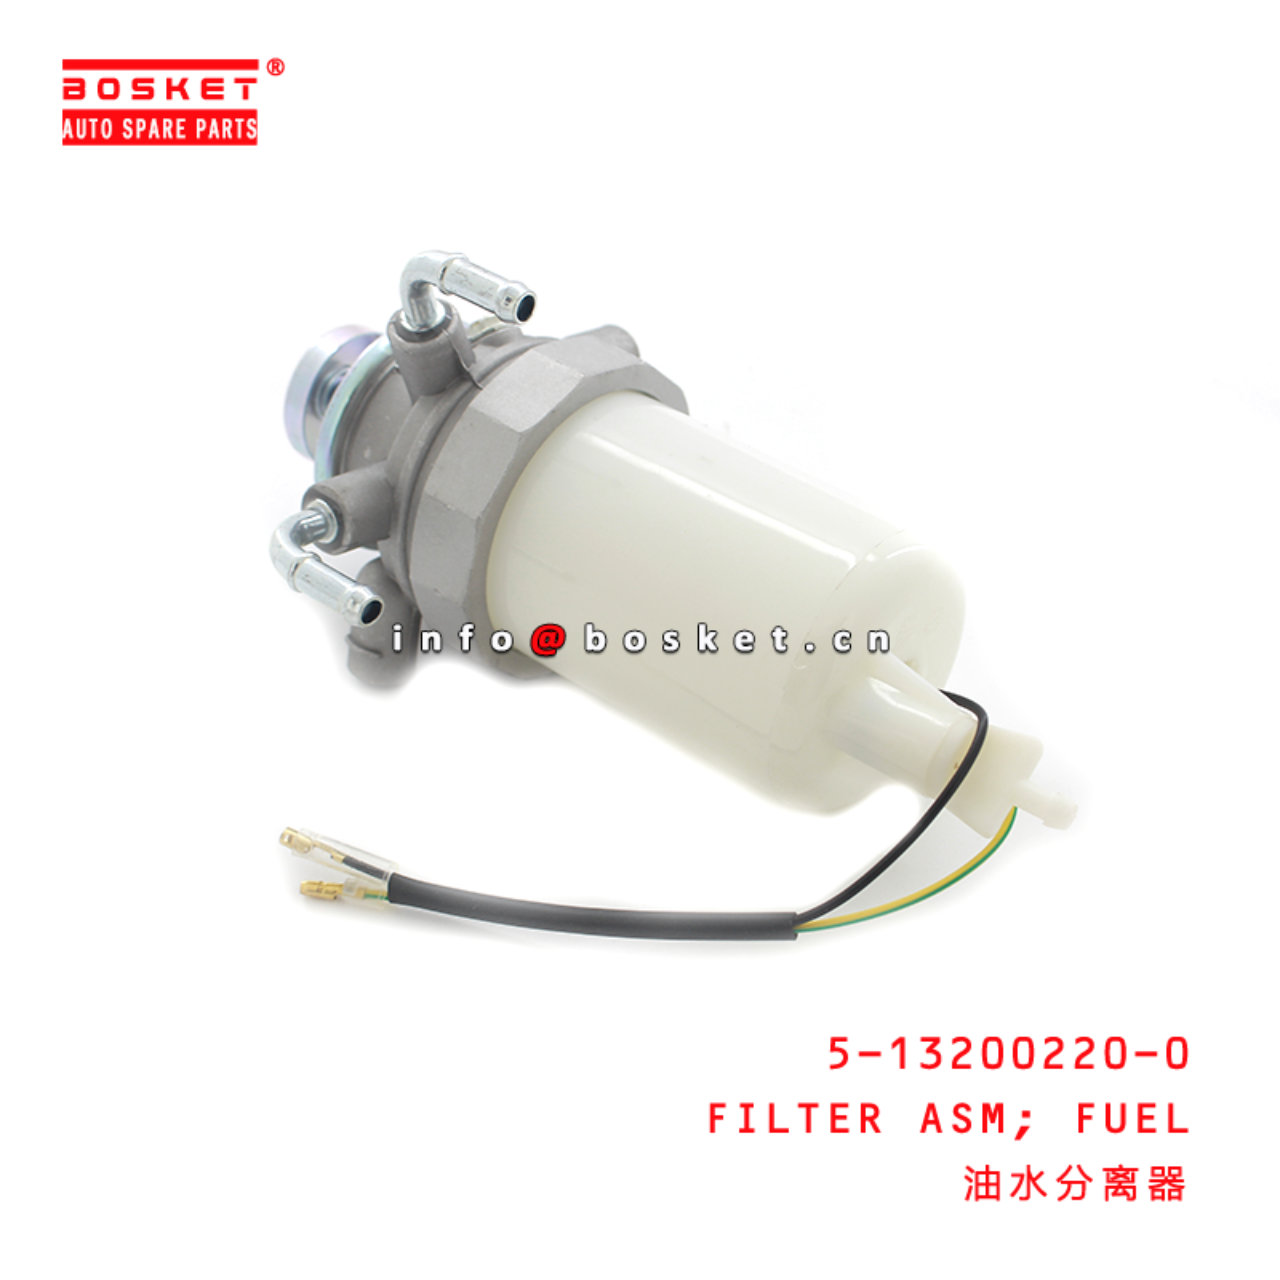 5-13200220-0 Fuel Filter Assembly Suitable for ISUZU TFR54 5132002200